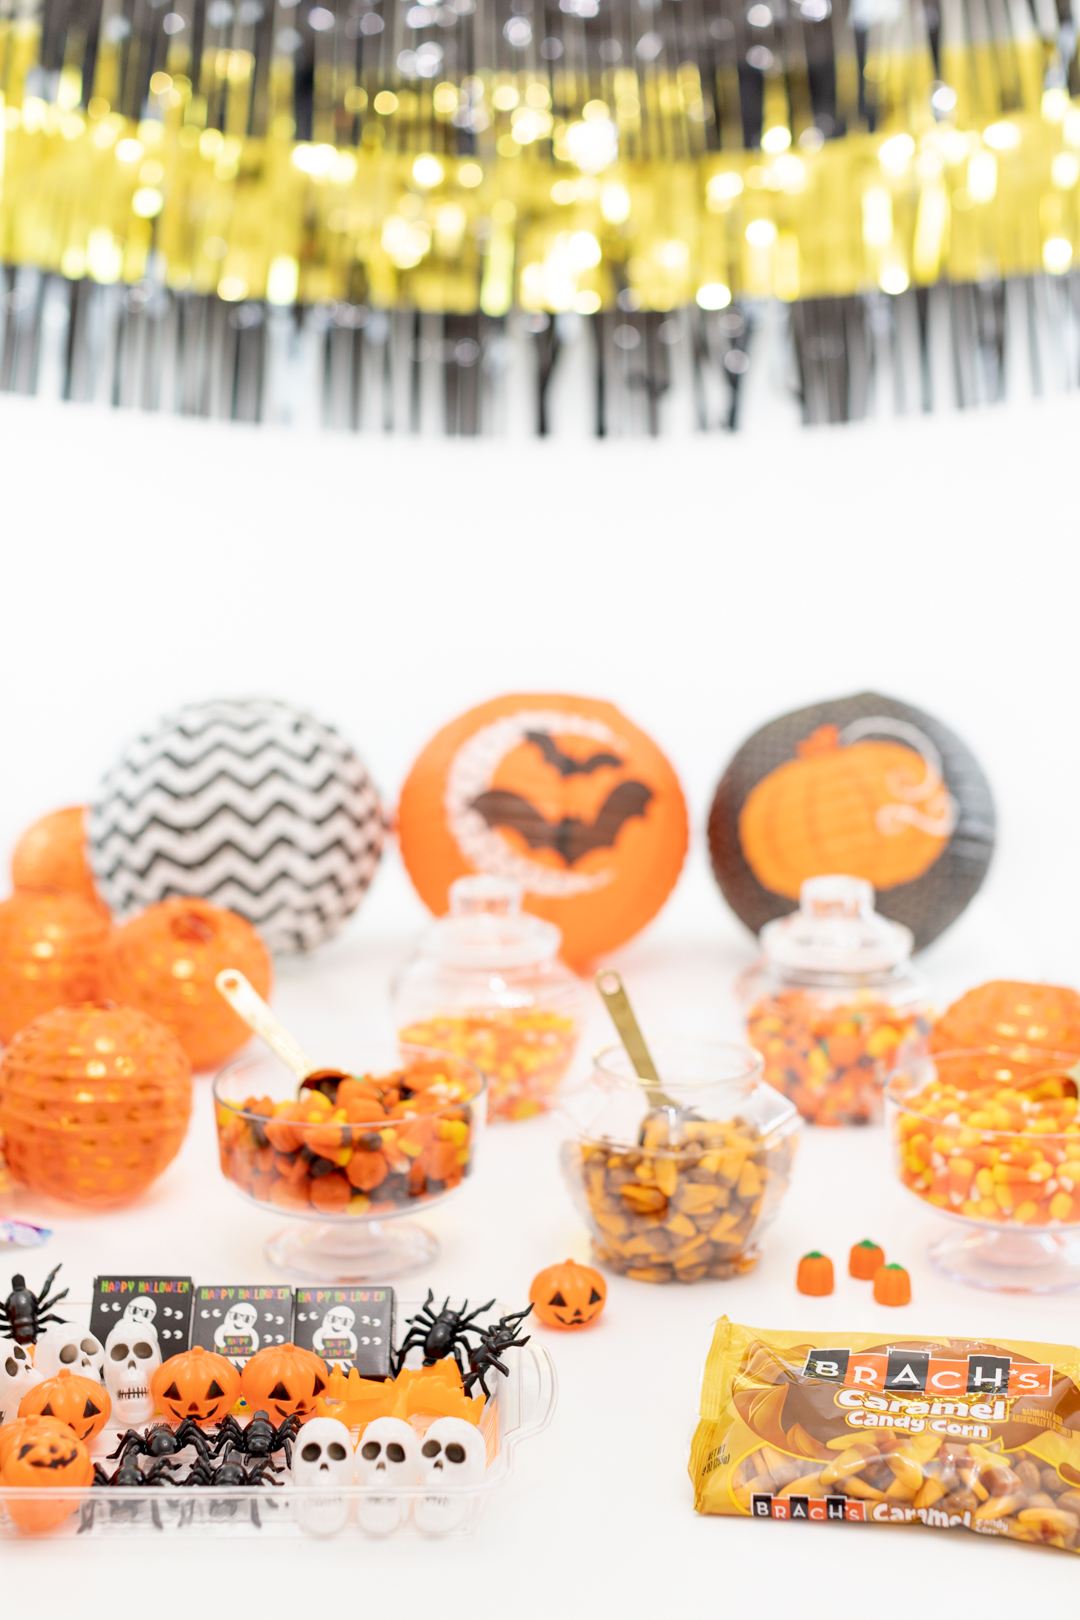 Halloween Candy Party Ideas with Gold, Black and Orange Decorations.